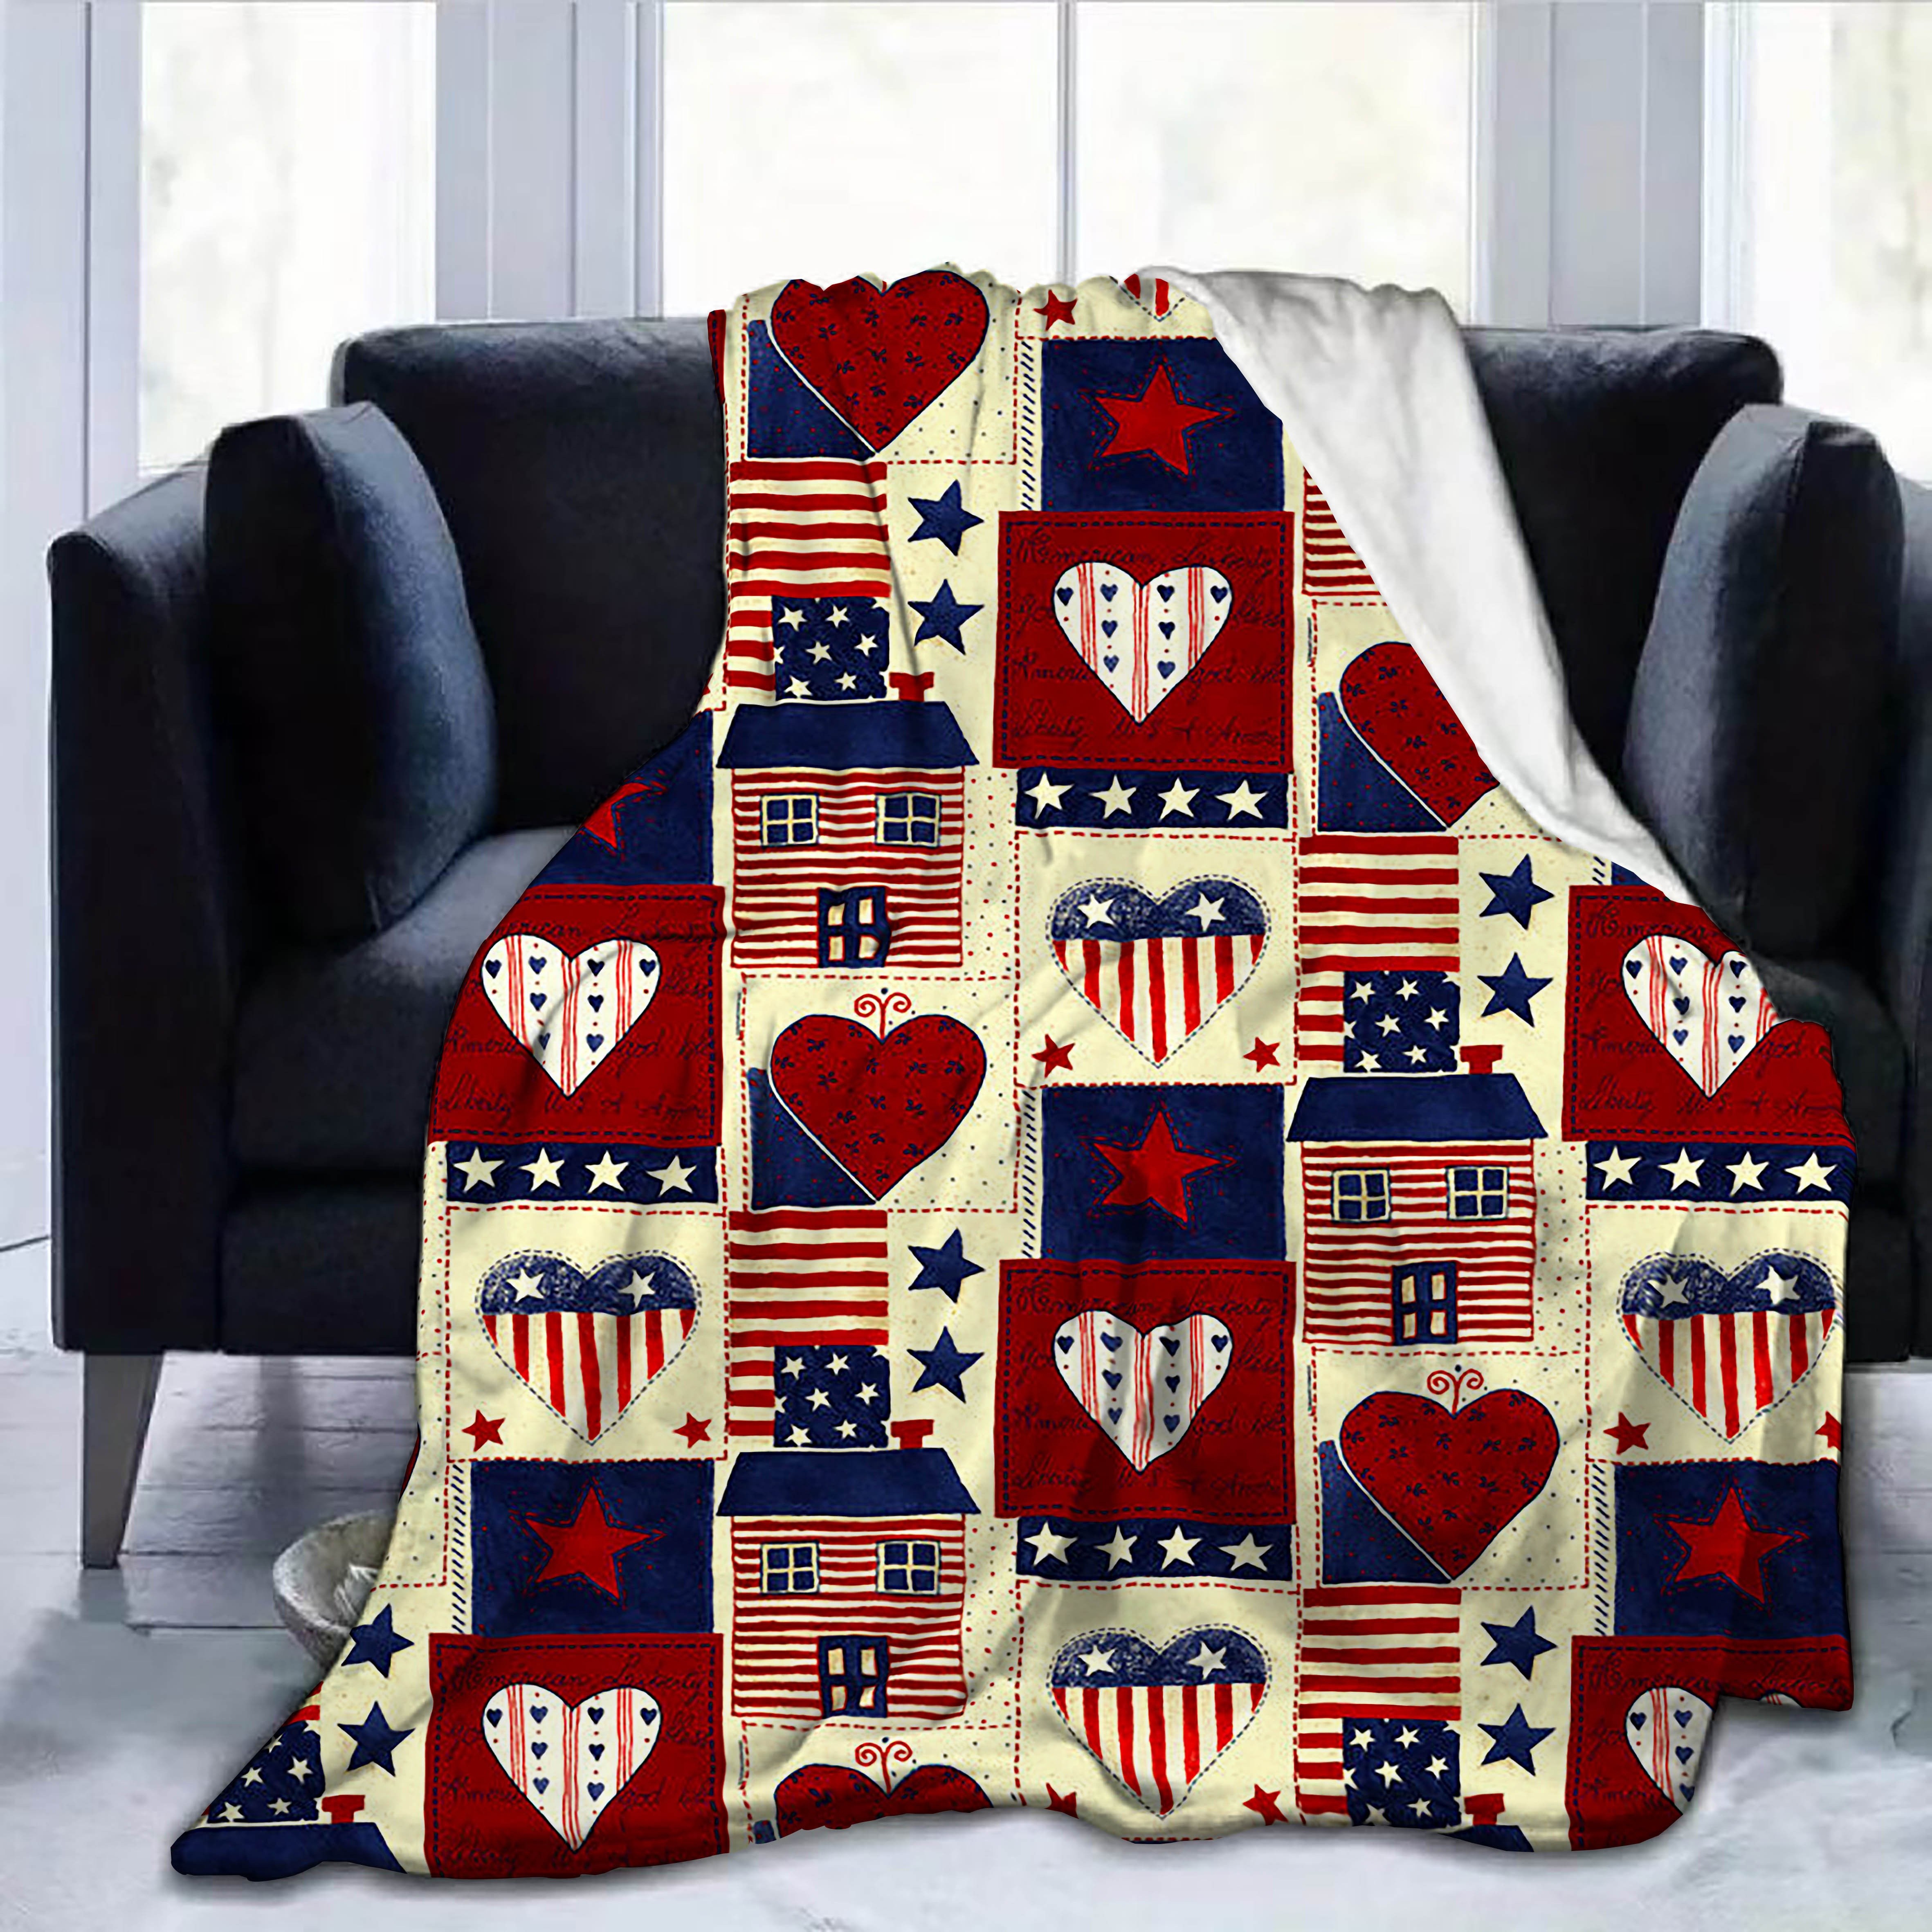 

1pc Digital Printed American Flag Love Blanket, Super Warm, Soft And Comfortable Flannel Plush Cover Blanket, Suitable For Sofa Bed Office Picnic Camping, Available In All Seasons